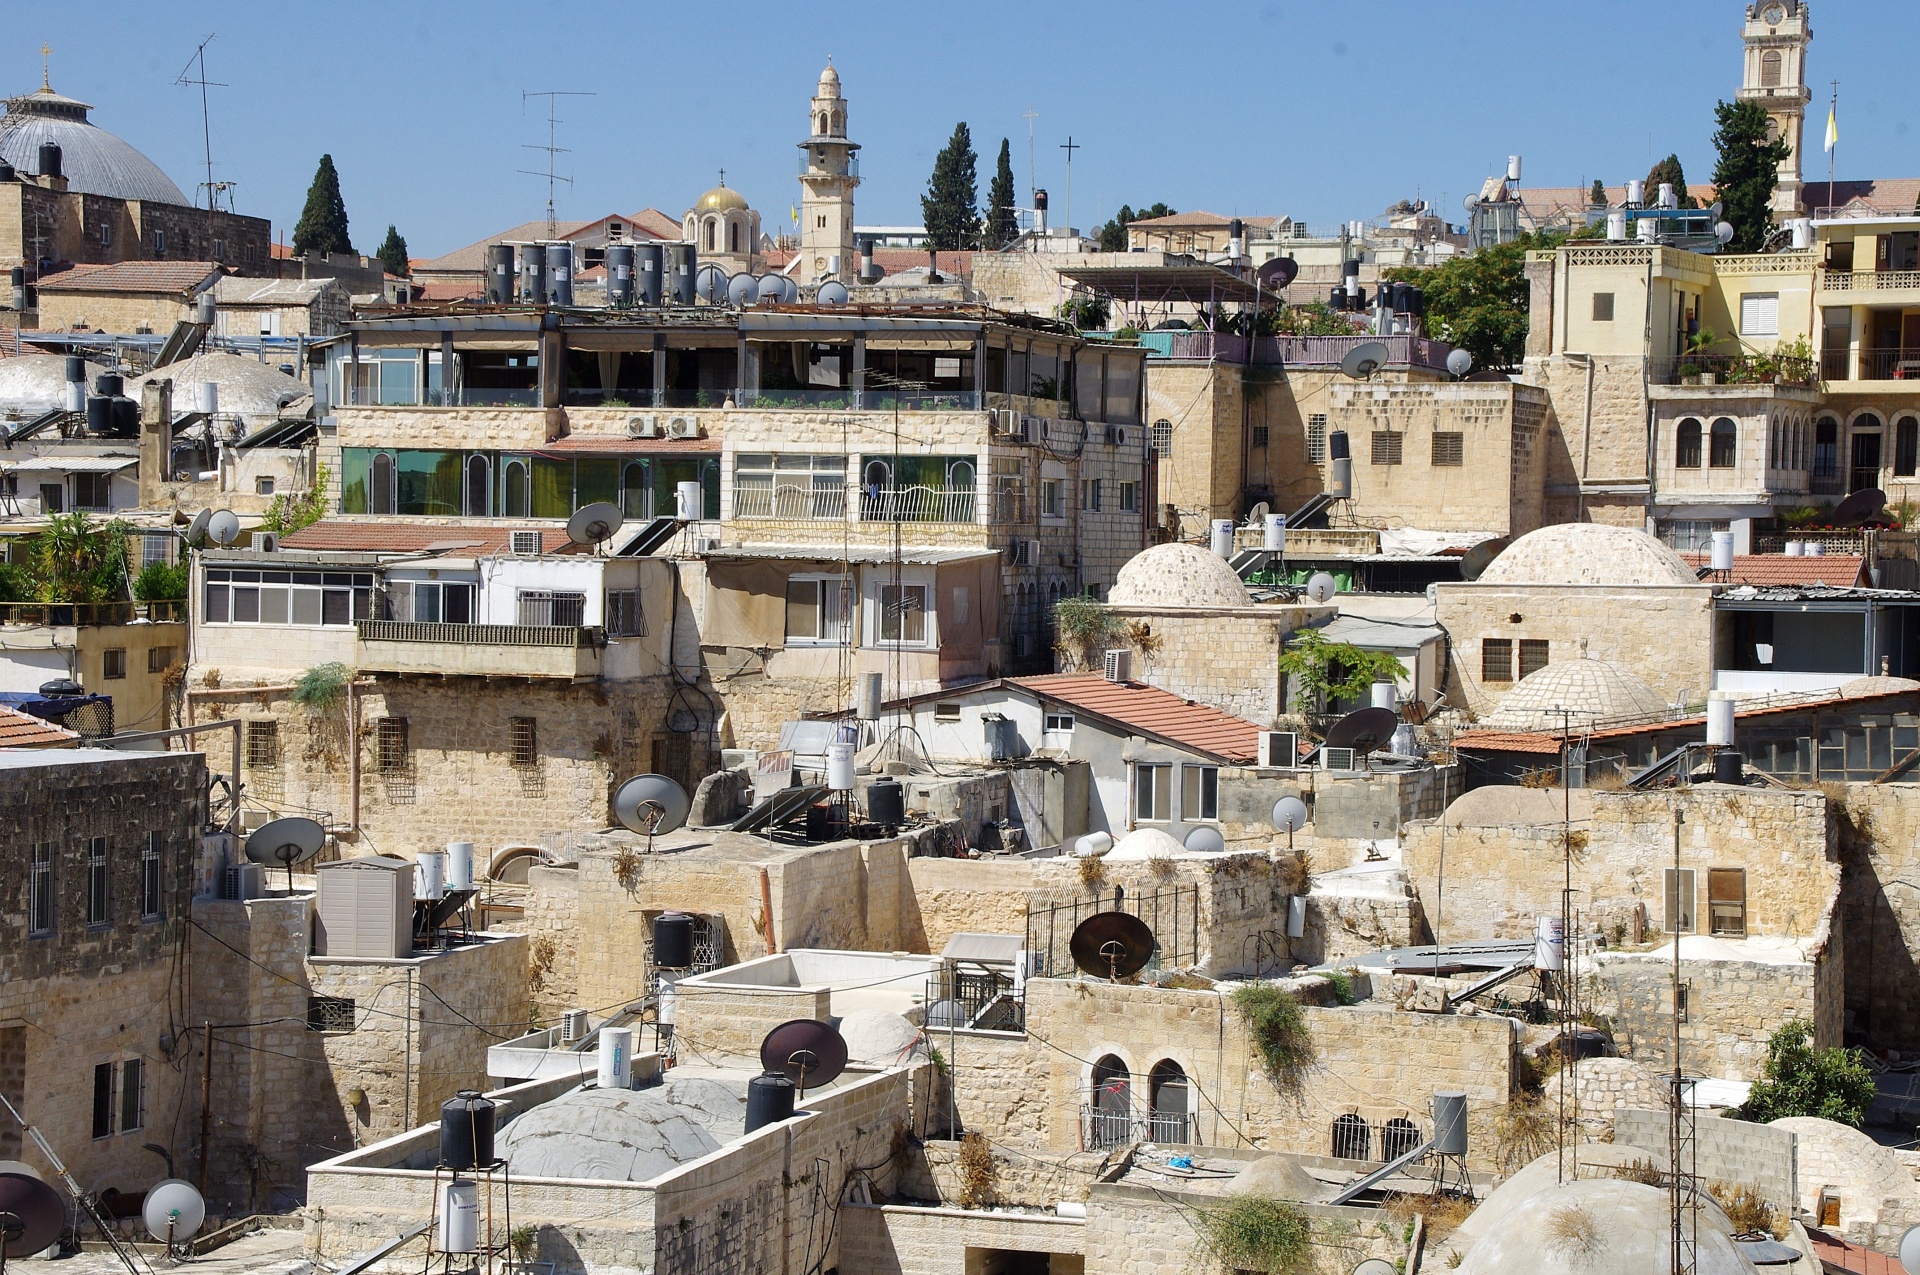 Rooftop view of Muslim quarter in Old City of Jerusalem